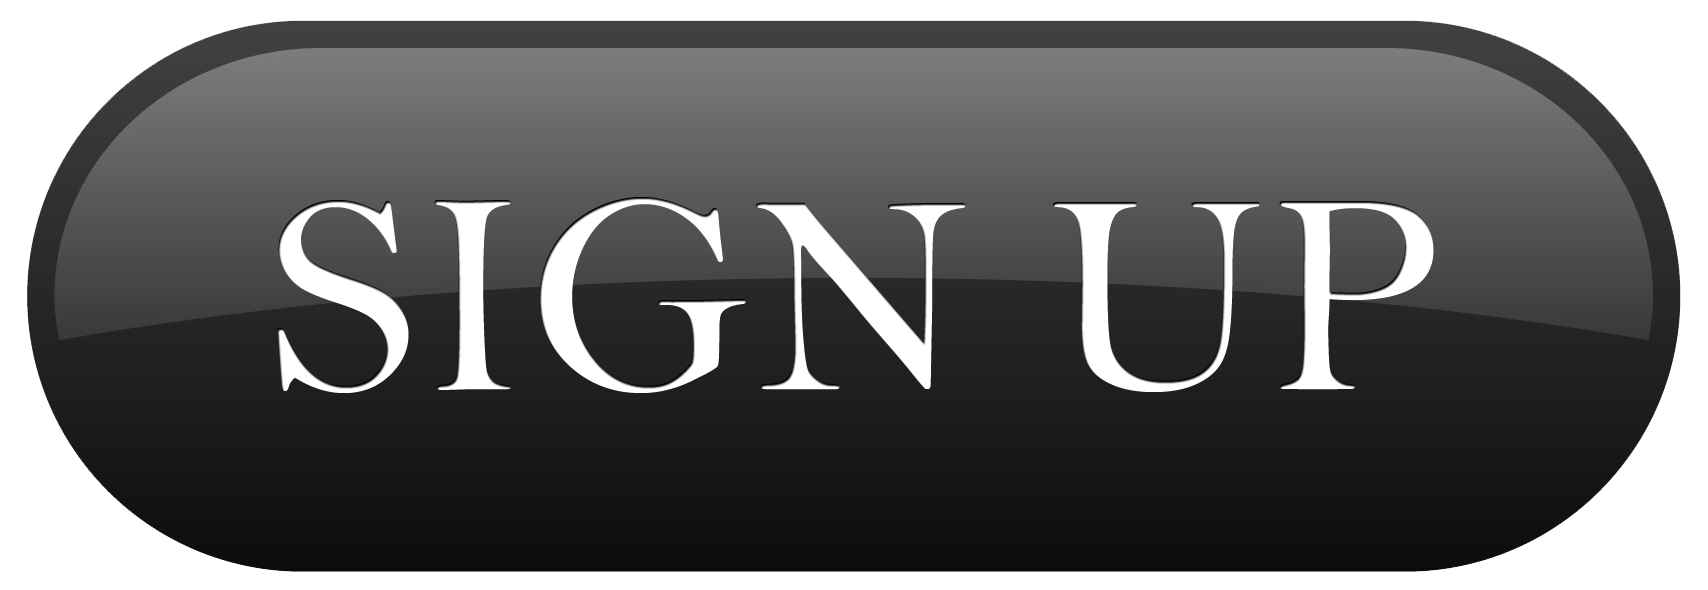 Sign Up Button Png - Sign Up Button Png Transparent Image, Transparent background PNG HD thumbnail